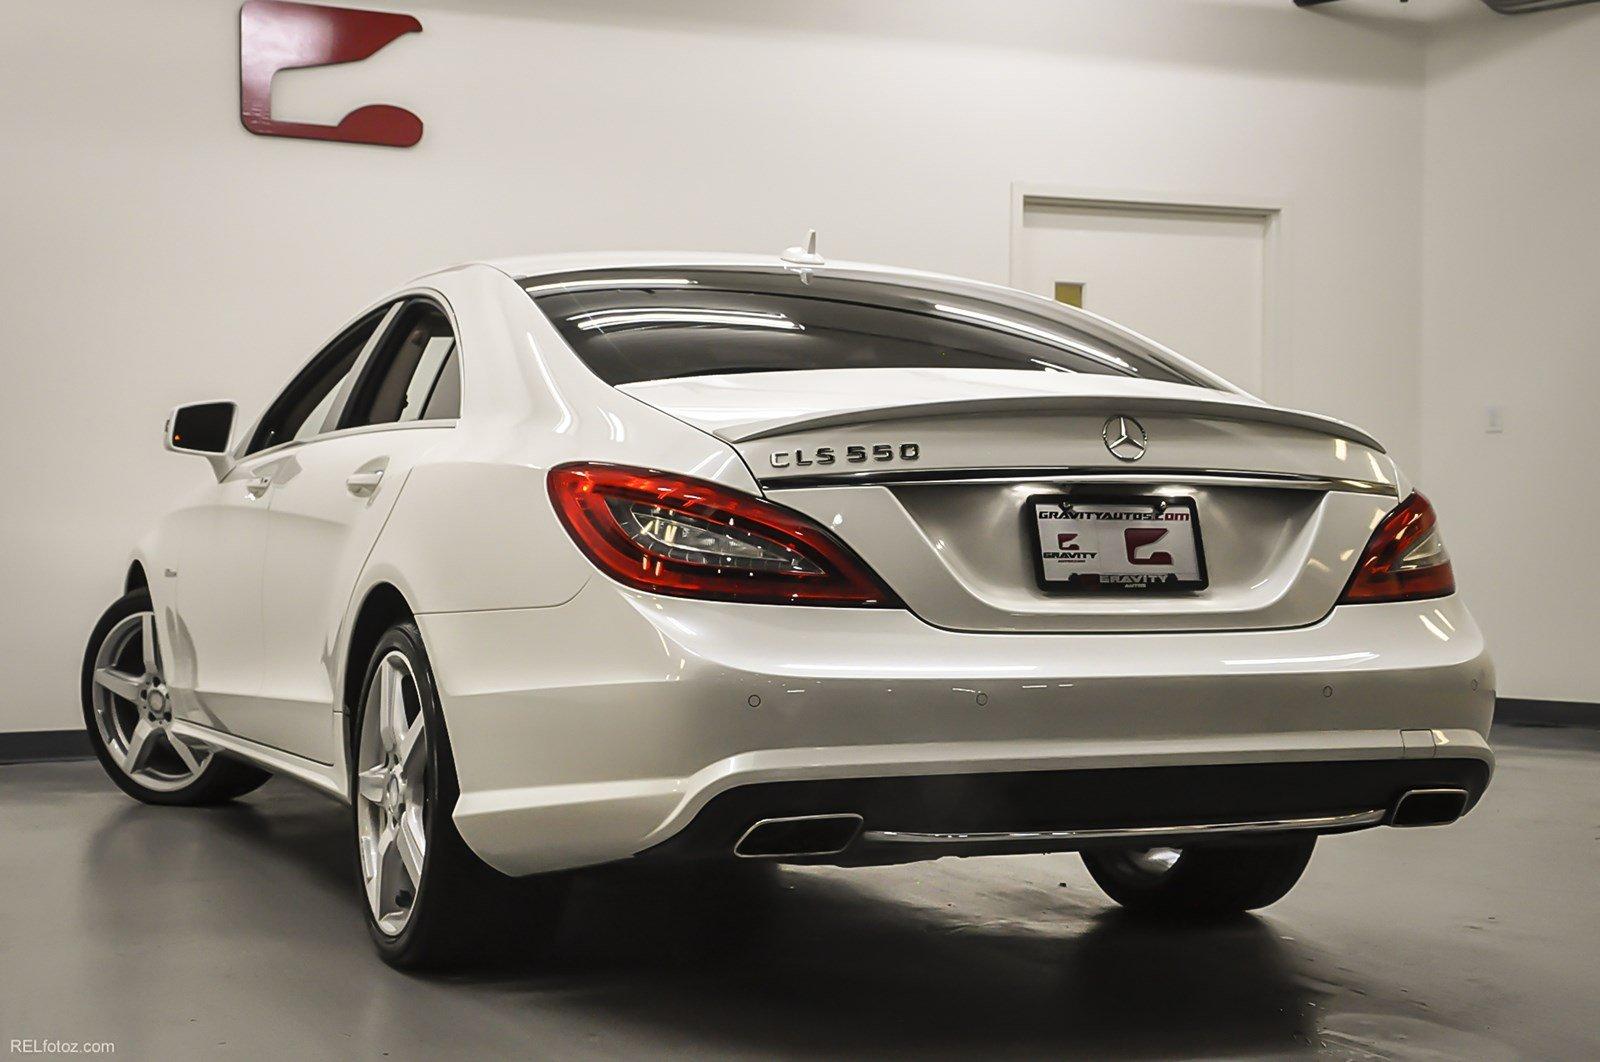 Used 2012 Mercedes-Benz CLS-Class CLS 550 for sale Sold at Gravity Autos Marietta in Marietta GA 30060 3